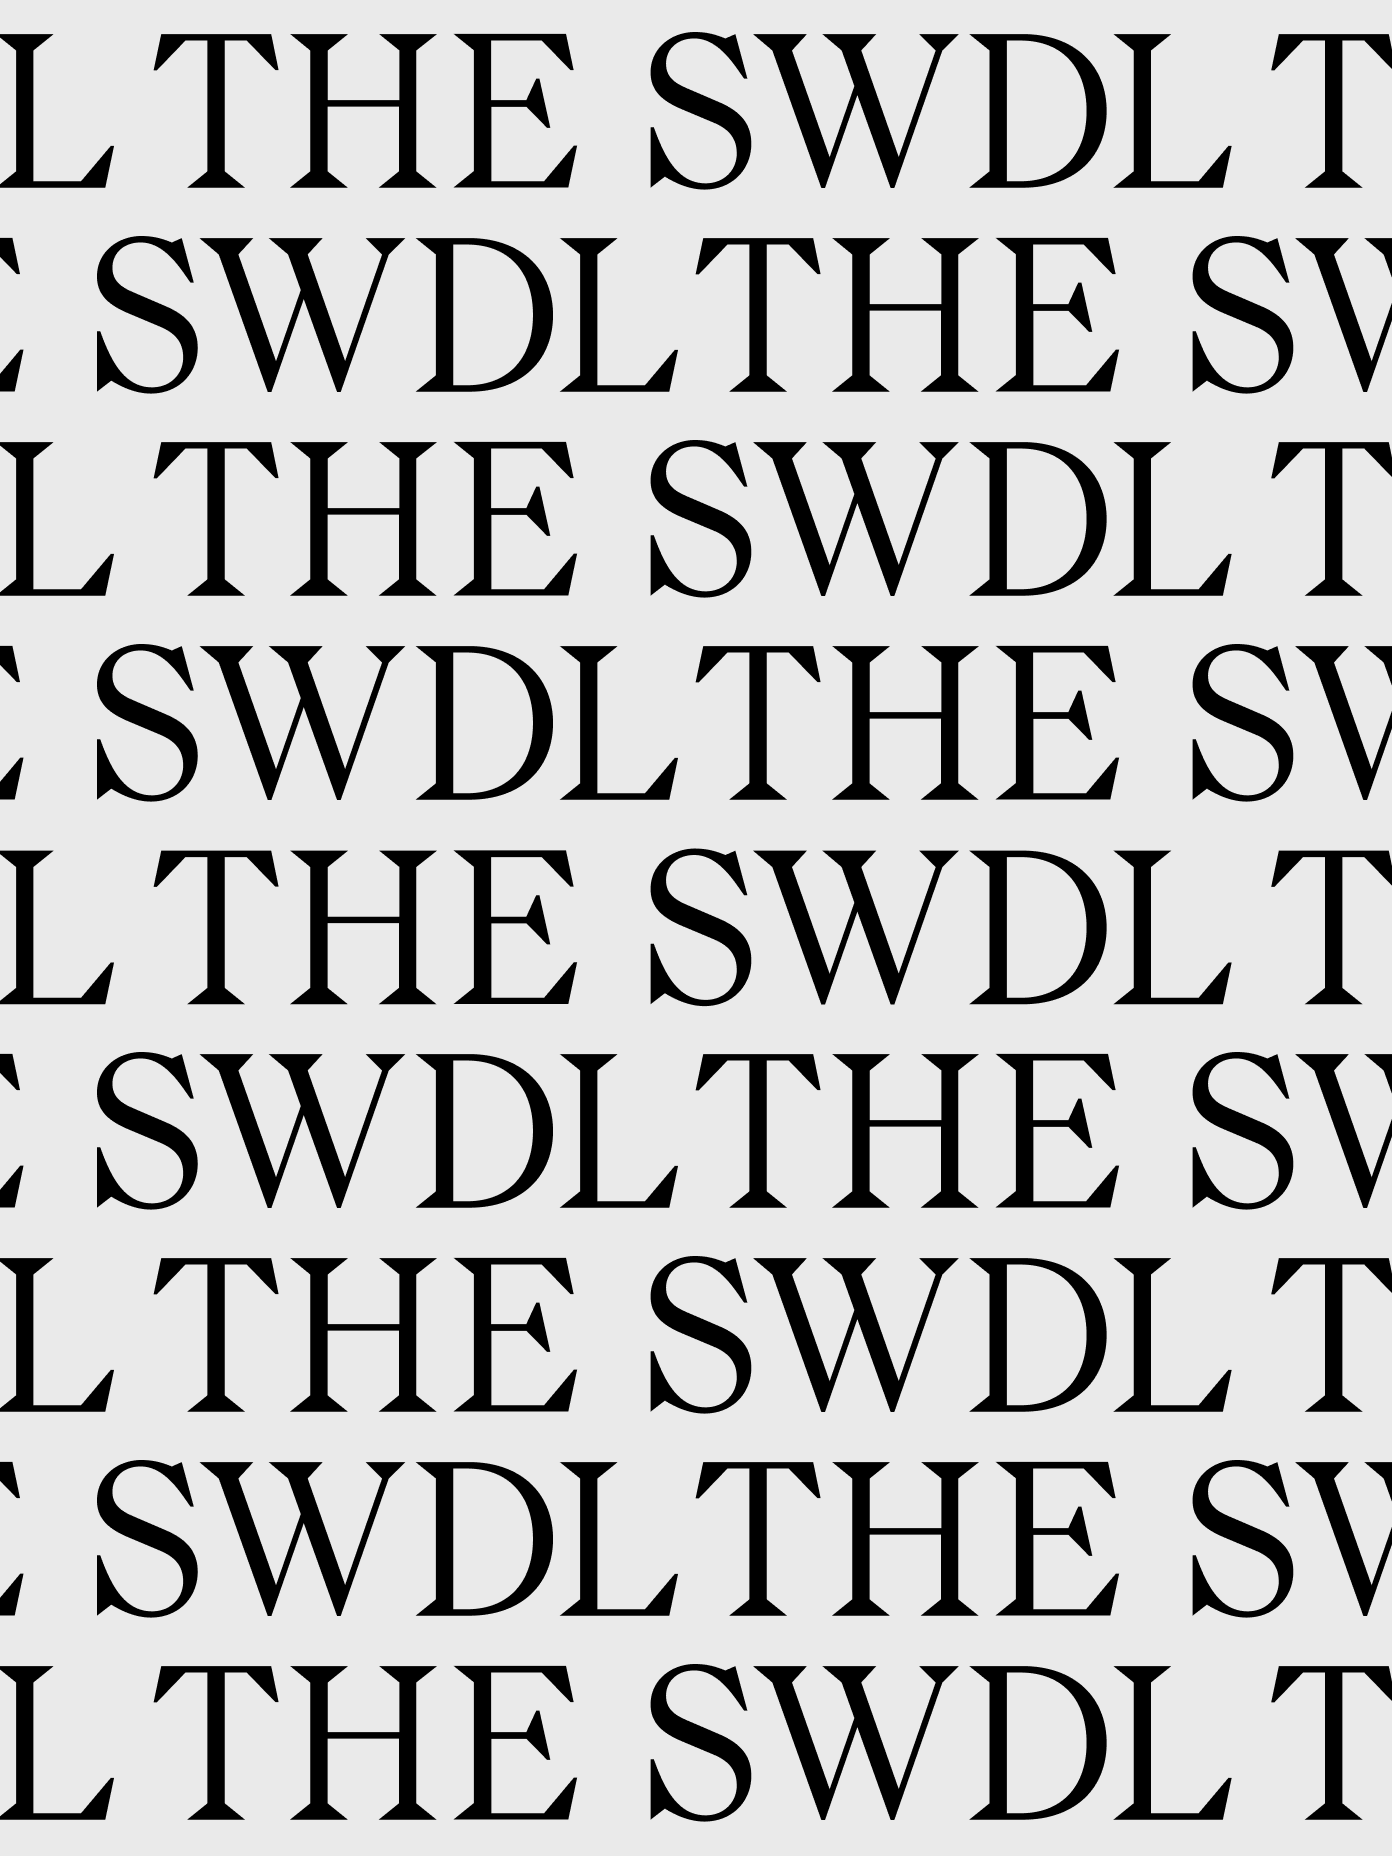 Swaddle new logo repeating over and over 